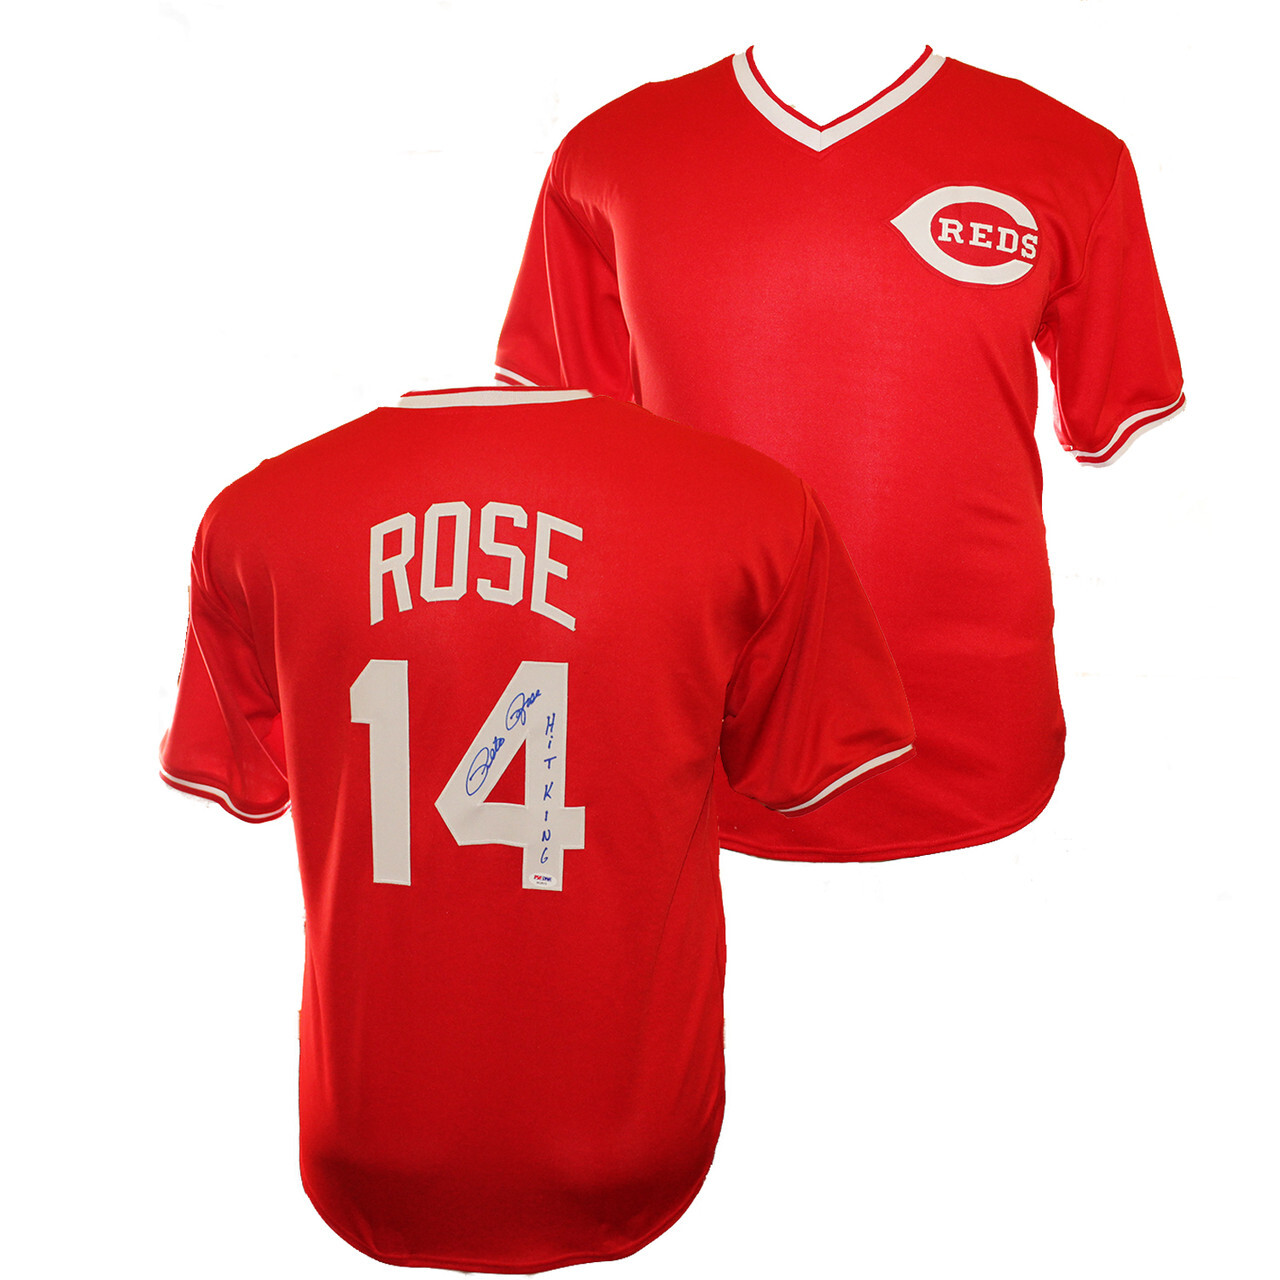 pete rose jersey signed